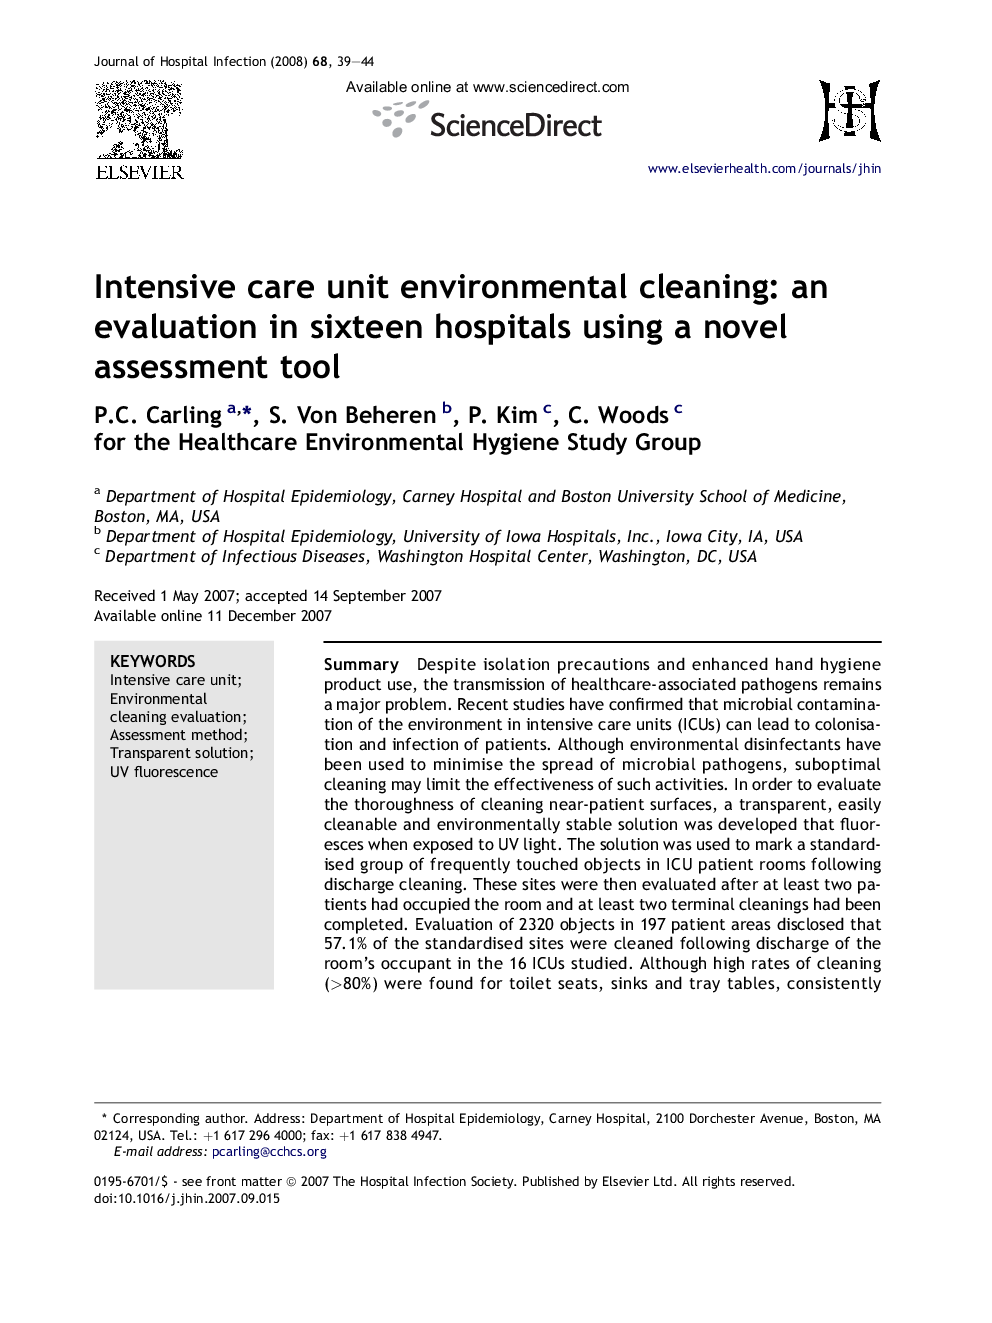 Intensive care unit environmental cleaning: an evaluation in sixteen hospitals using a novel assessment tool